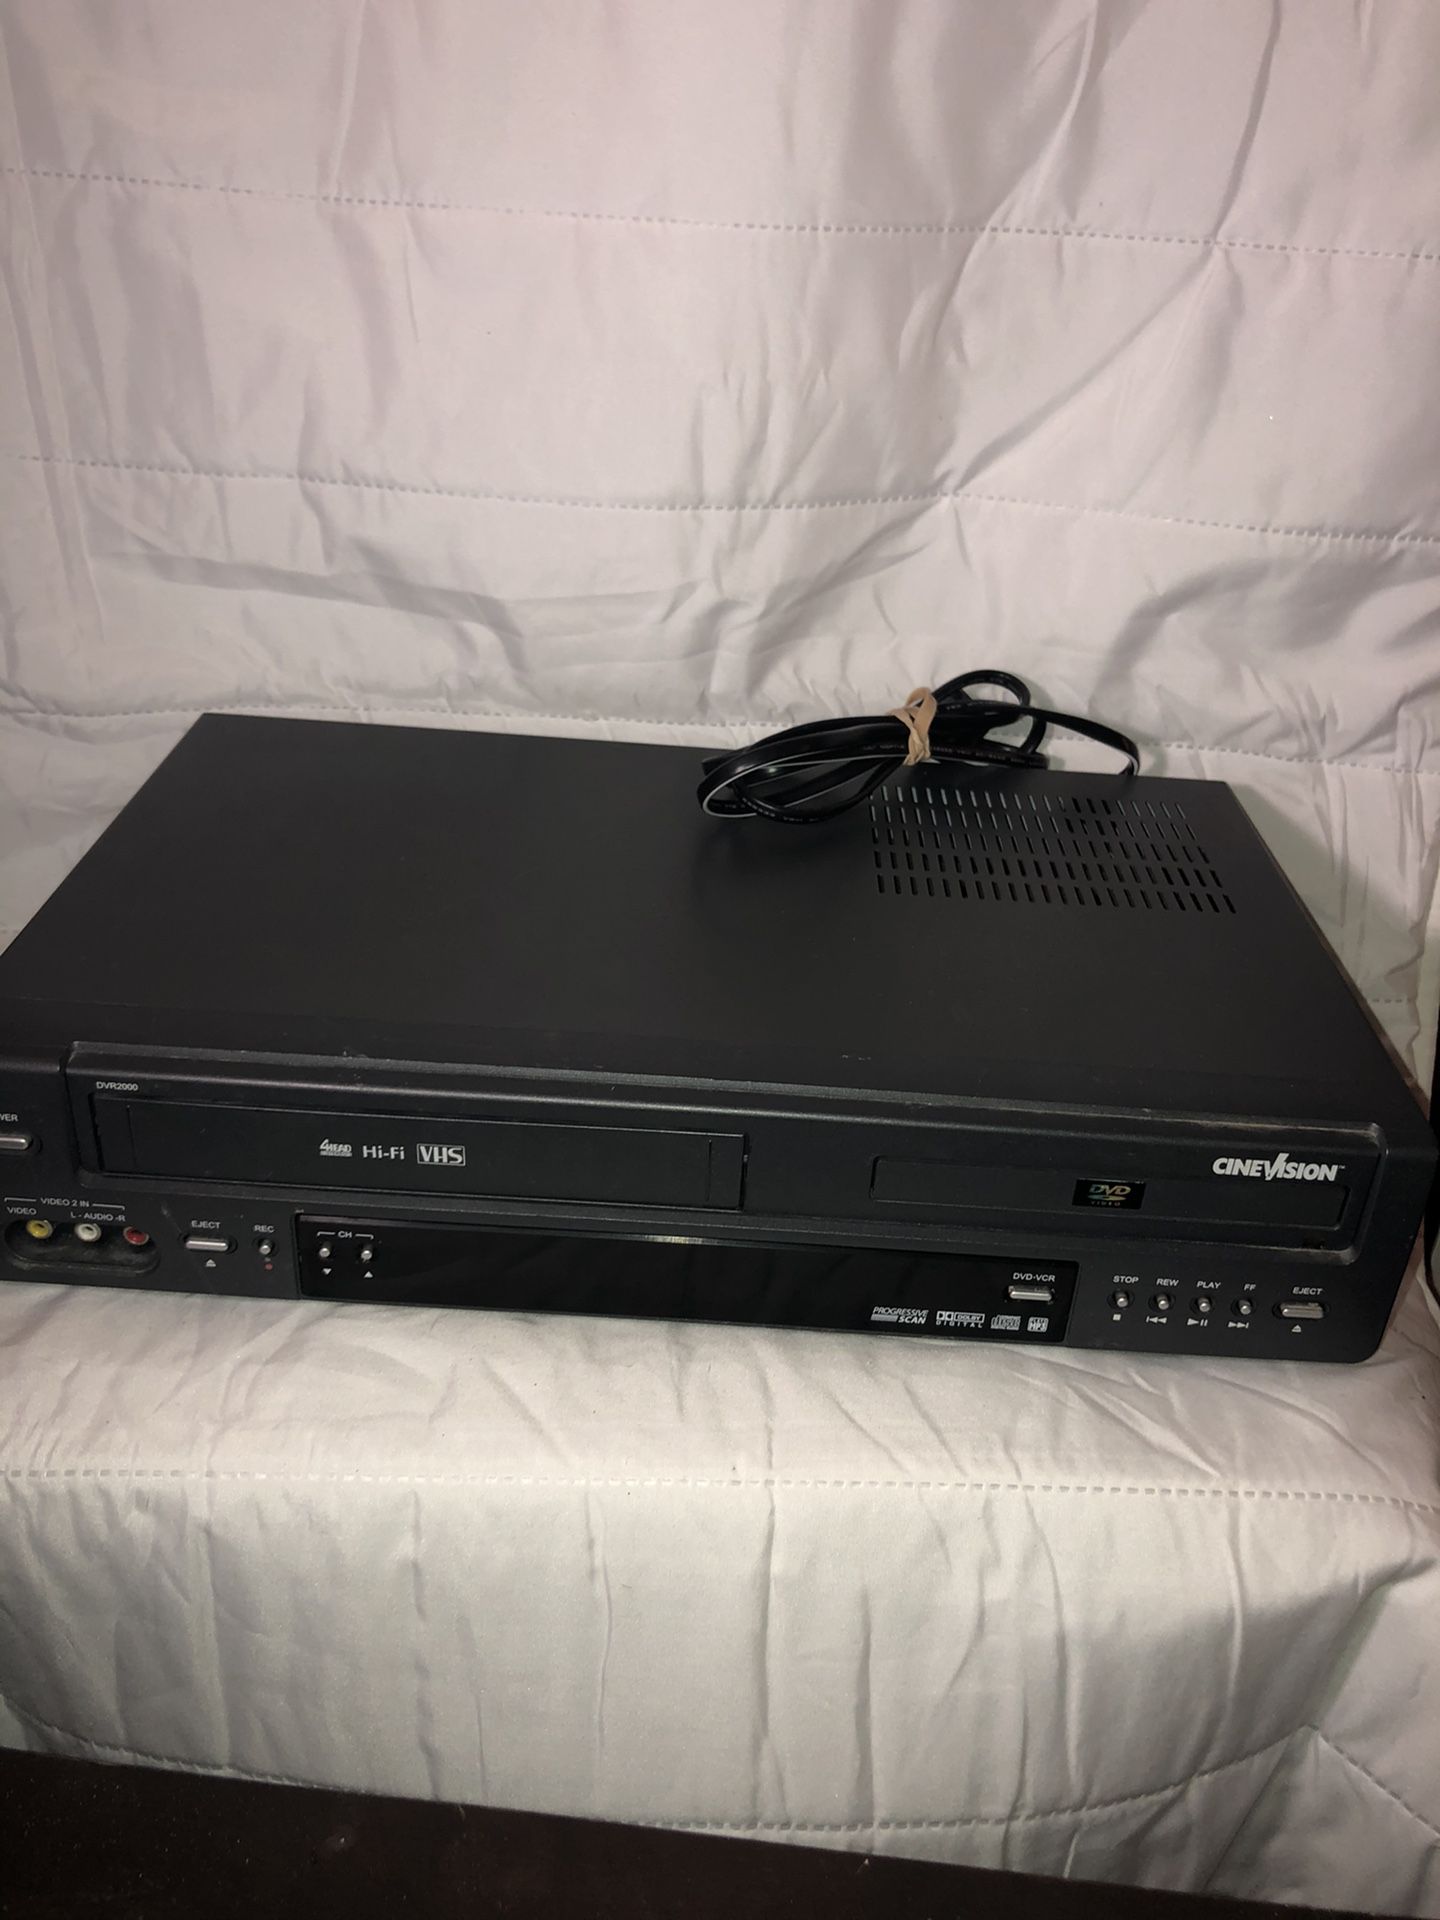 DVD TRAY WONT OPEN!! CINEVISION VCR/ DVD PLAYER COMBO #DVR2000 (VCR WORKS!!)